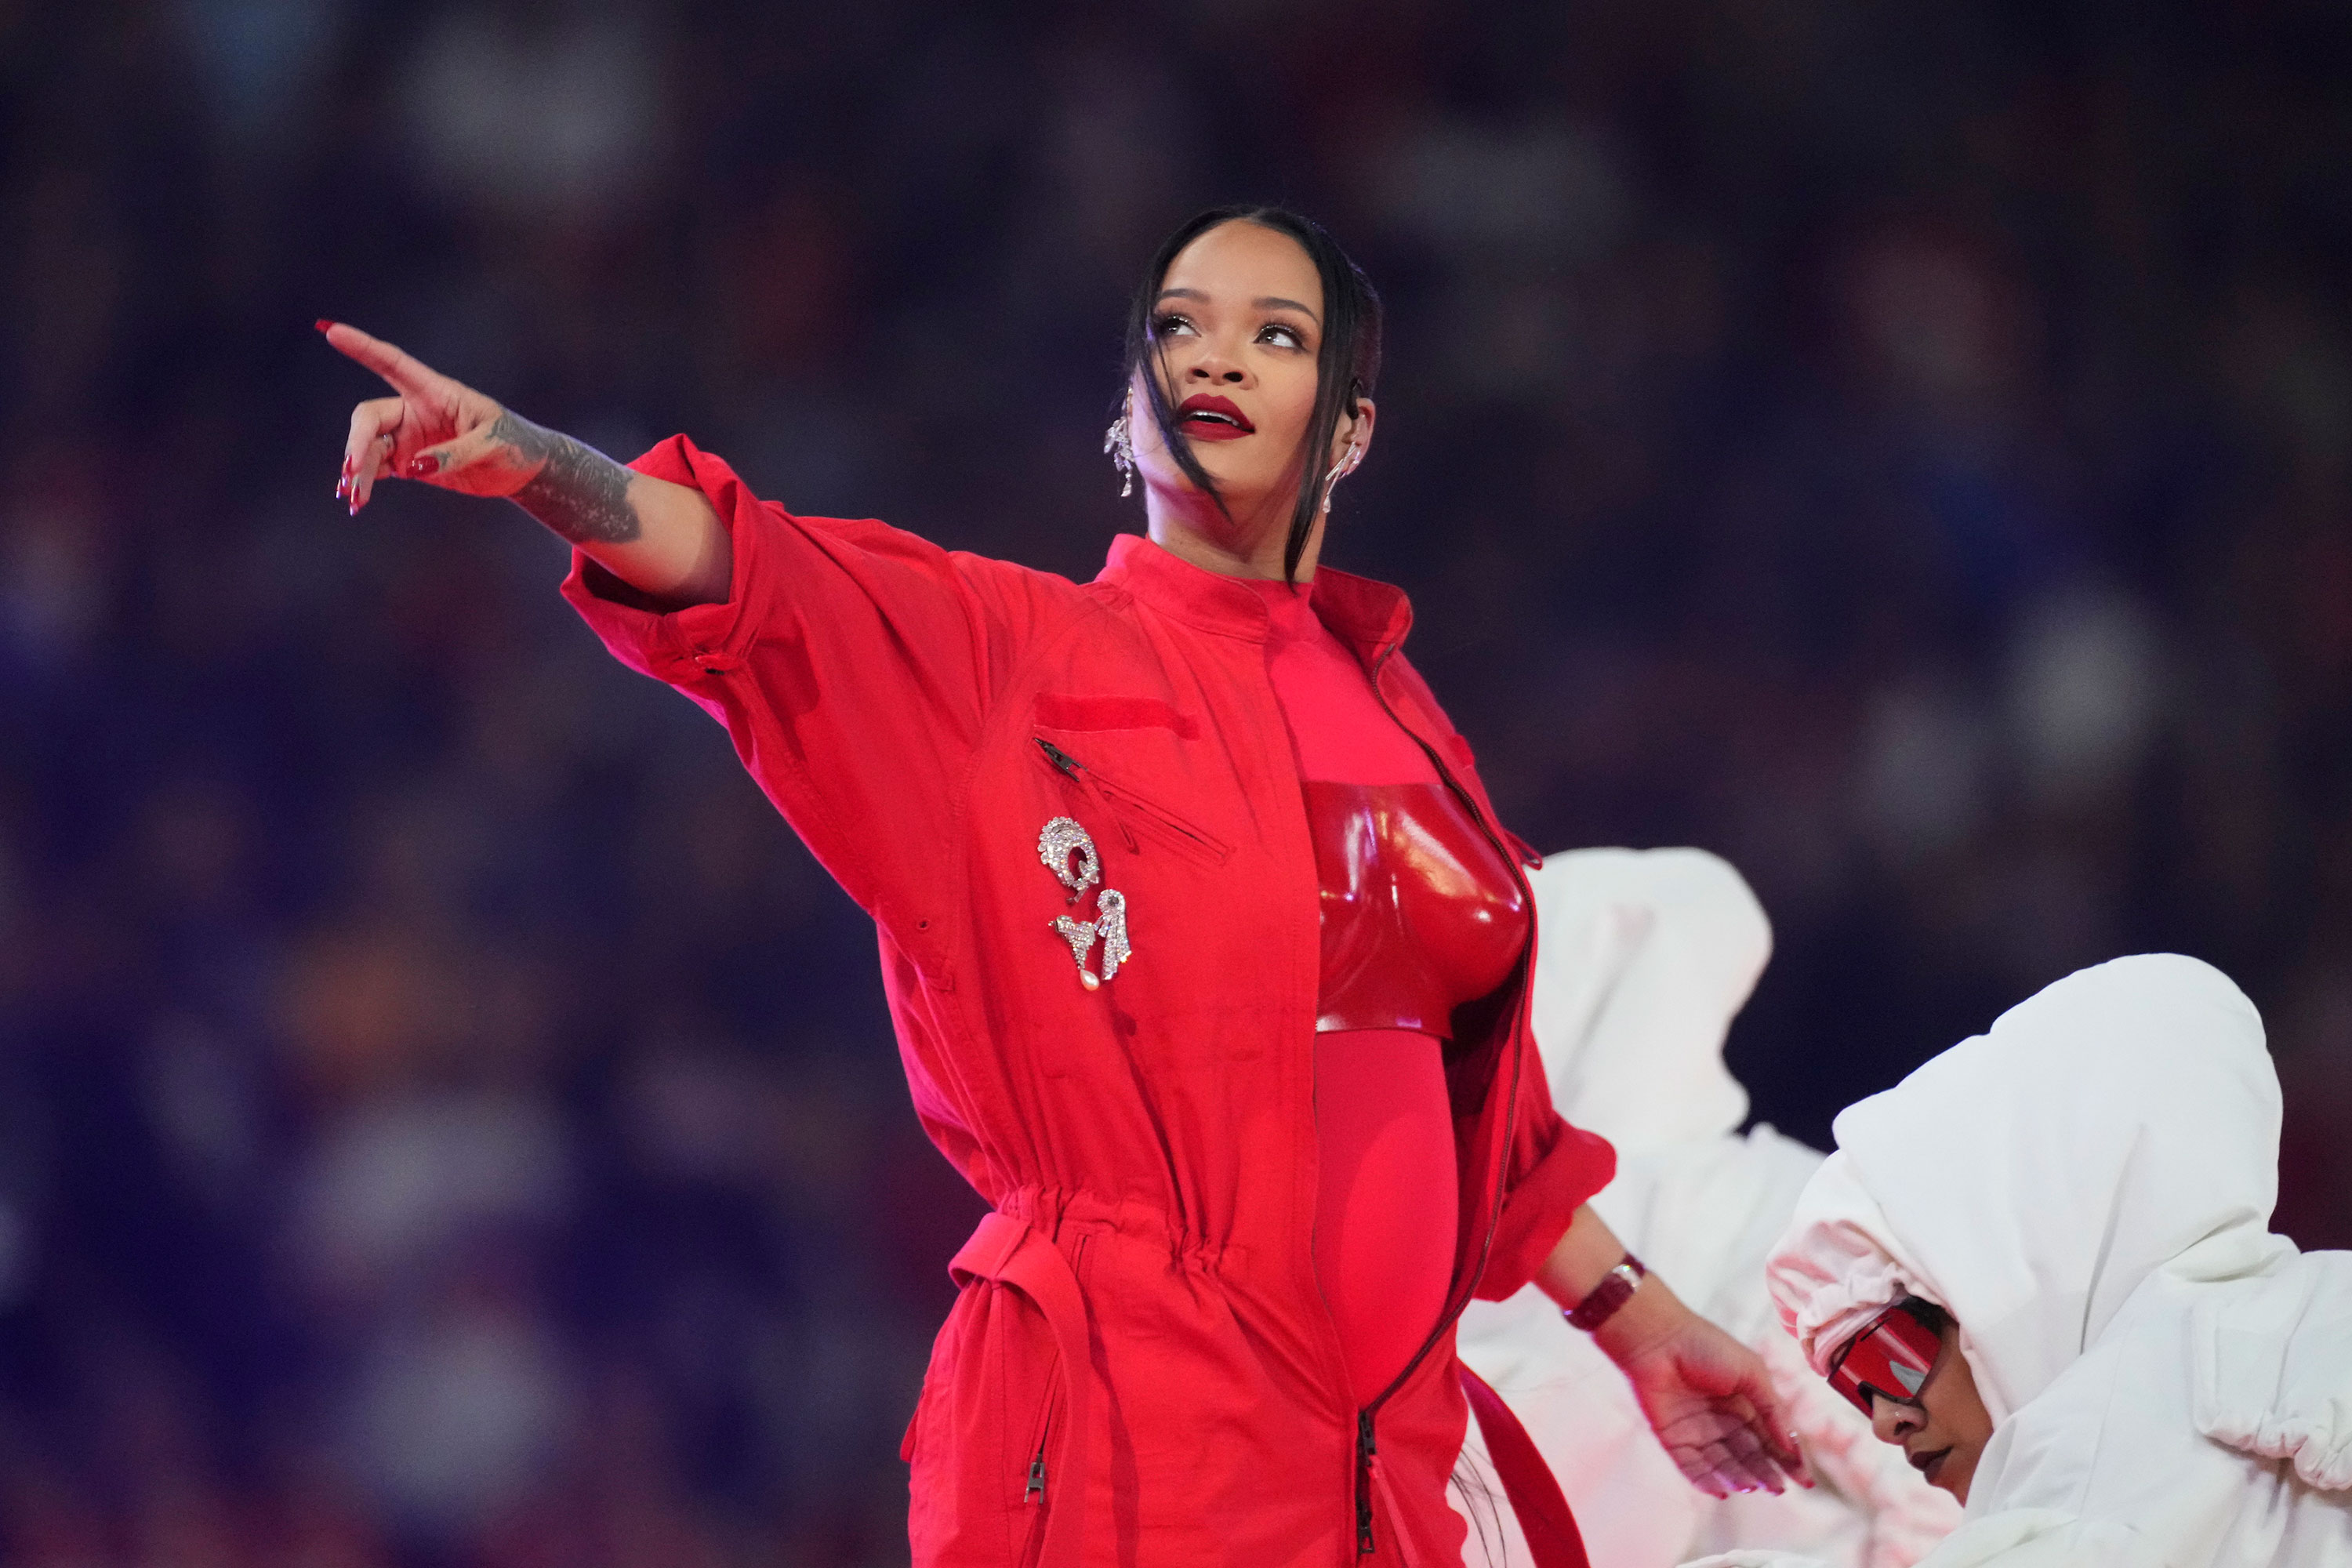 NOW: Rihanna performs in the Super Bowl halftime show